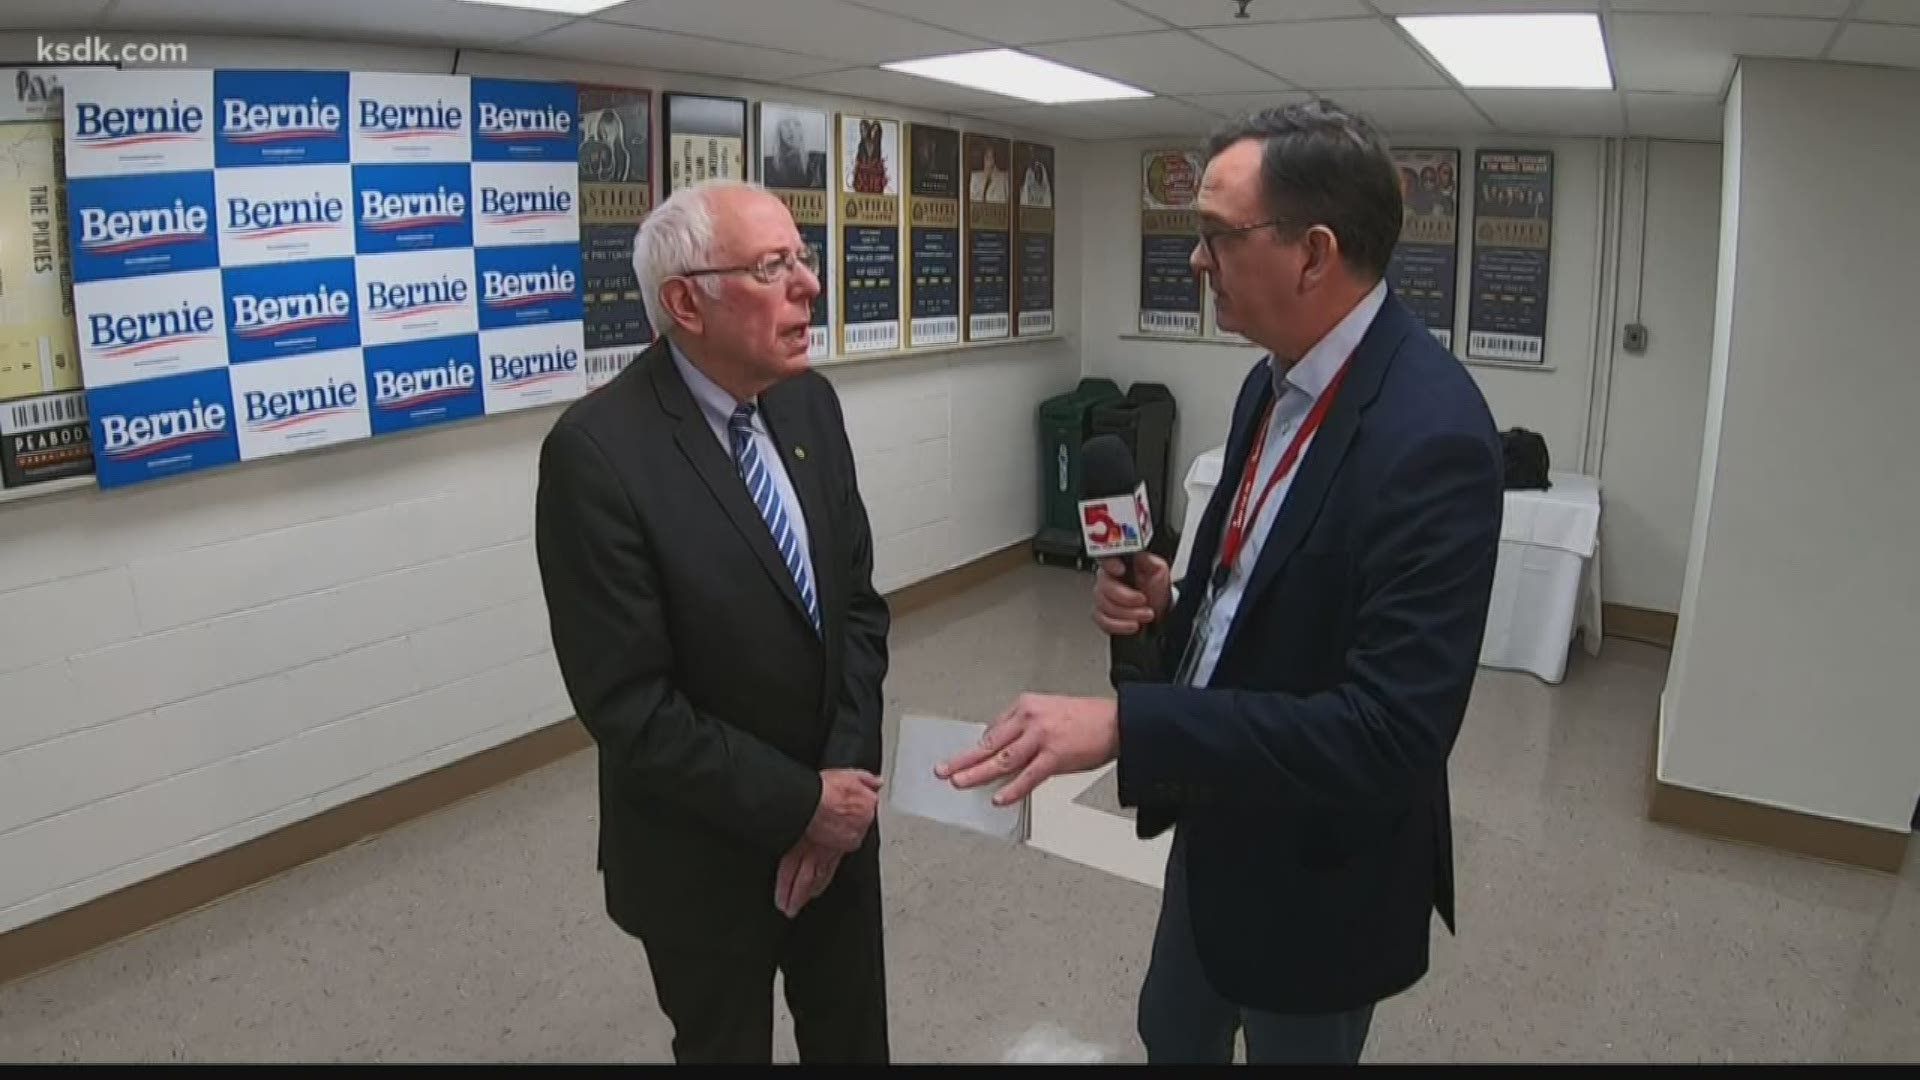 In a St. Louis television exclusive ahead of his rally at Stifel Theater, Sanders told 5 On Your Side there is "a whole lot" he would do differently as president